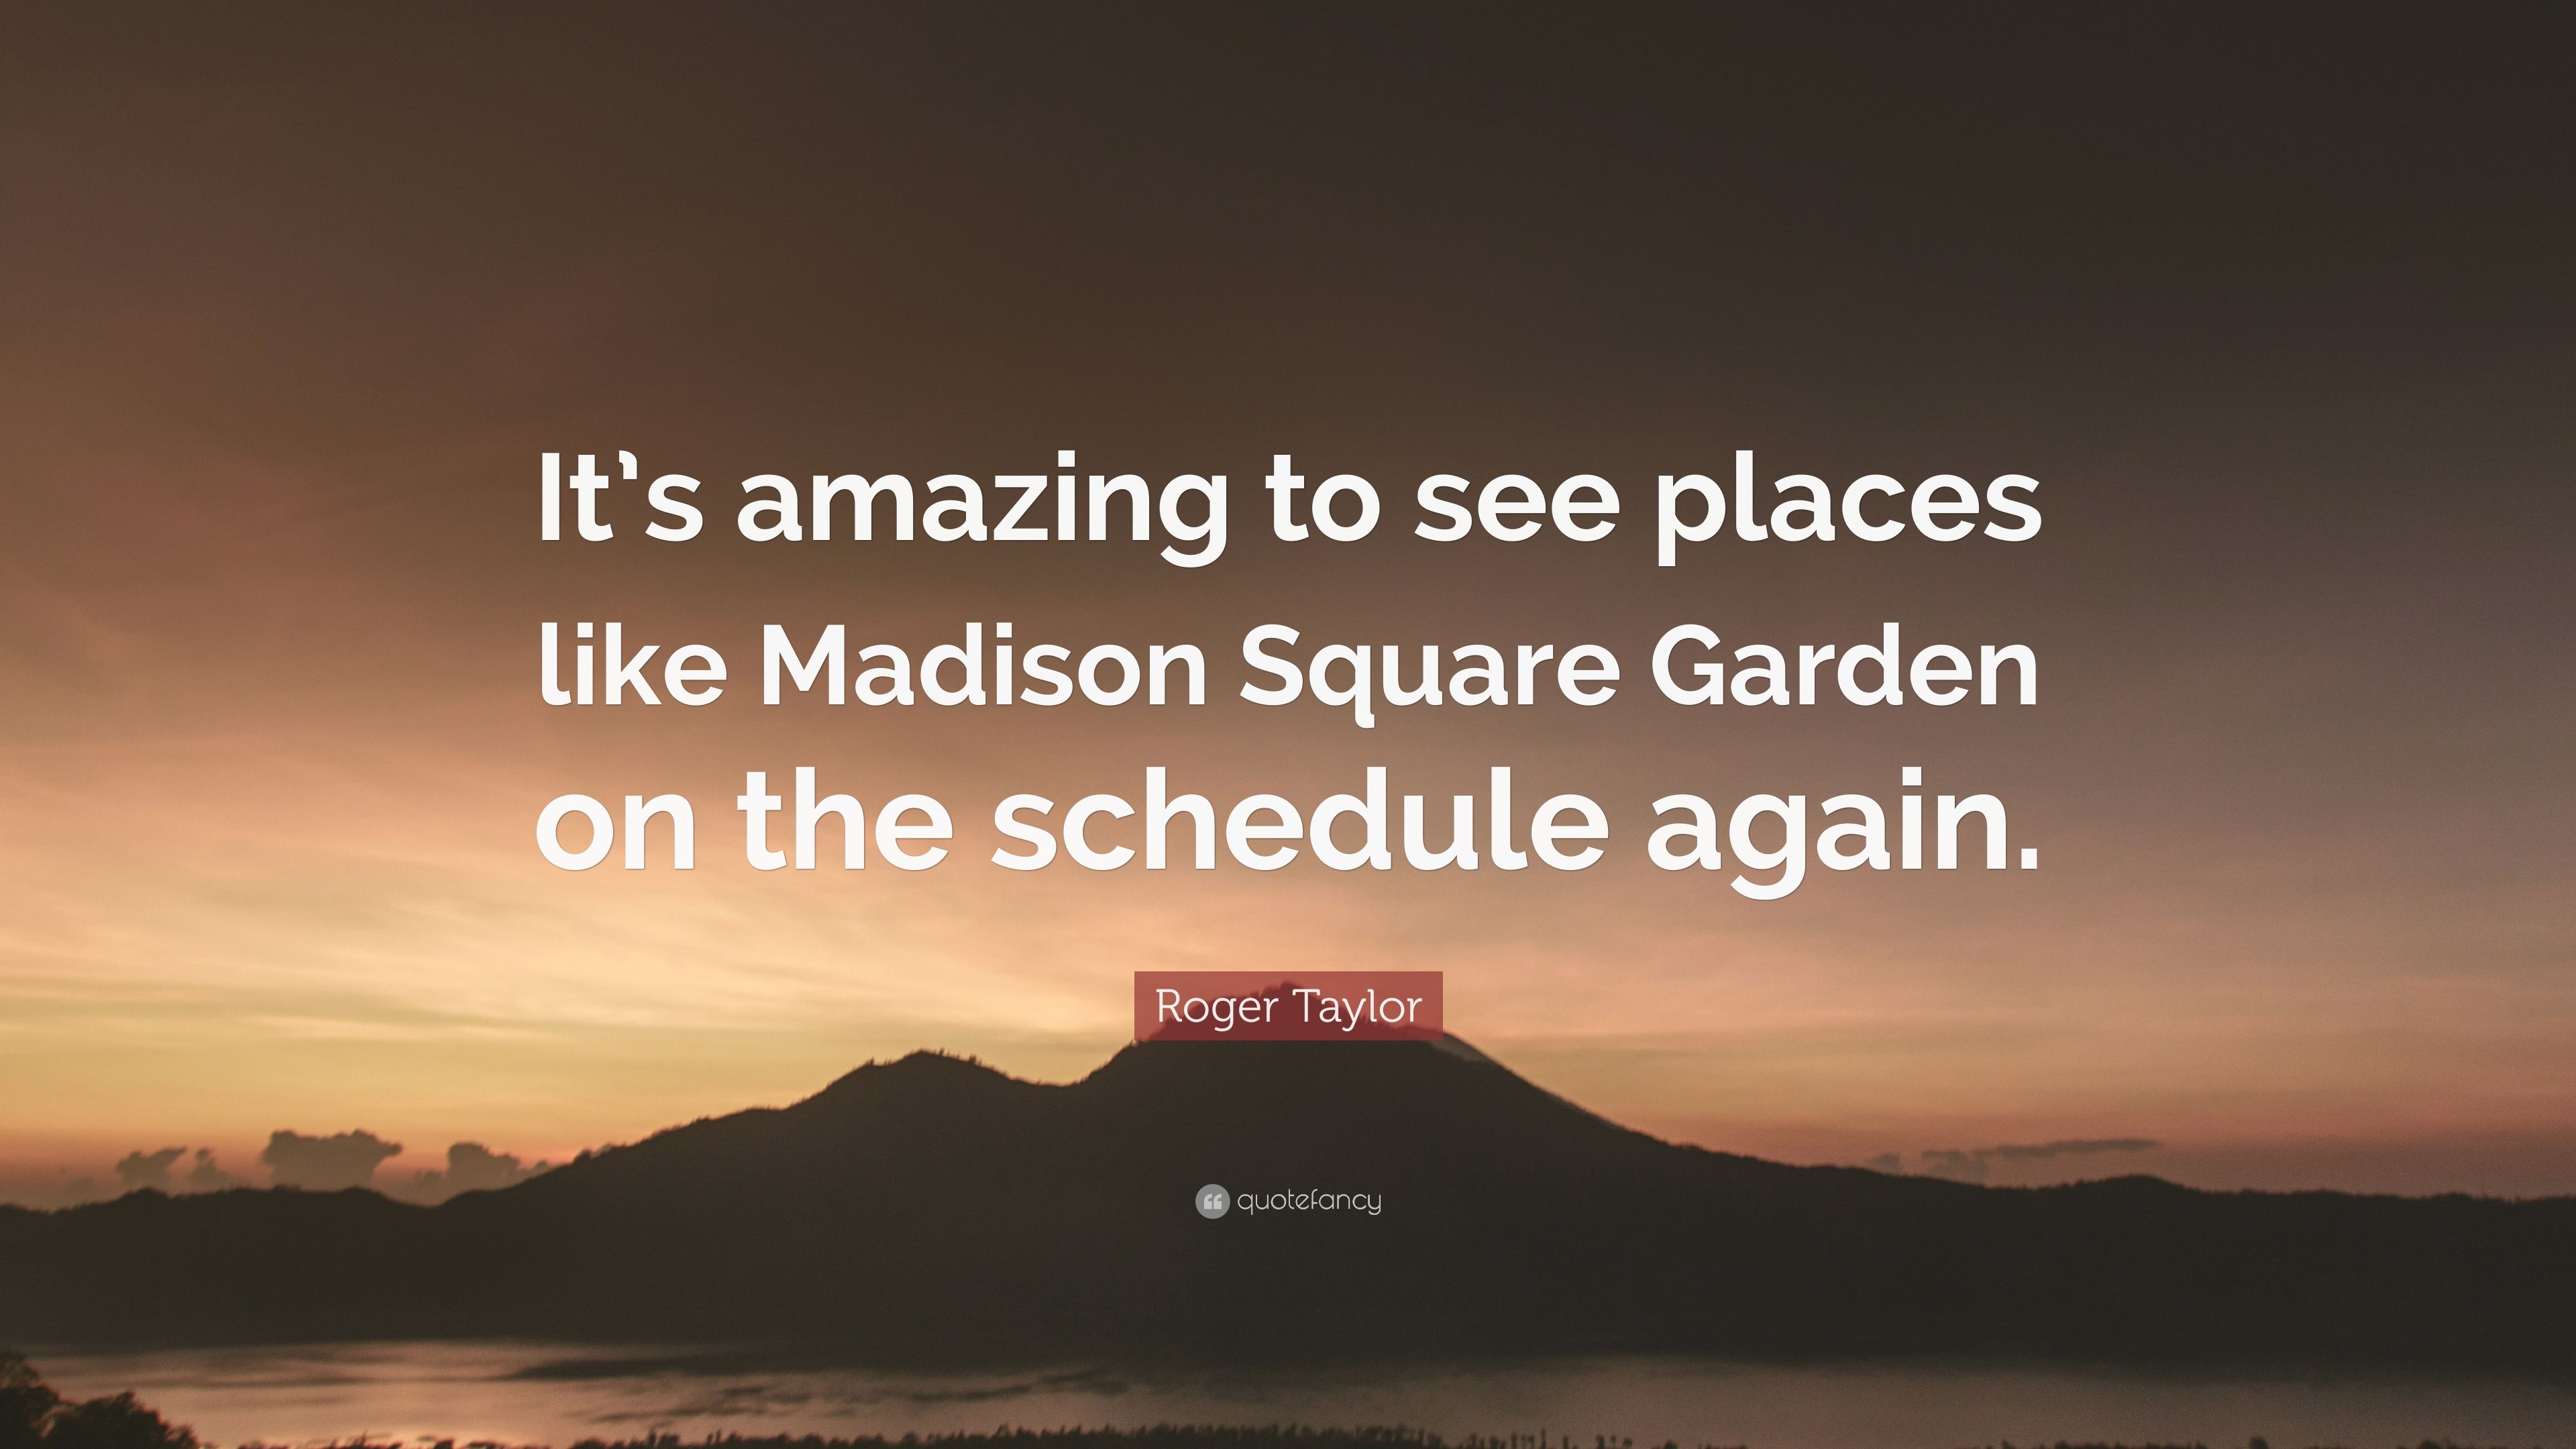 Roger Taylor Quote: “It's amazing to see places like Madison